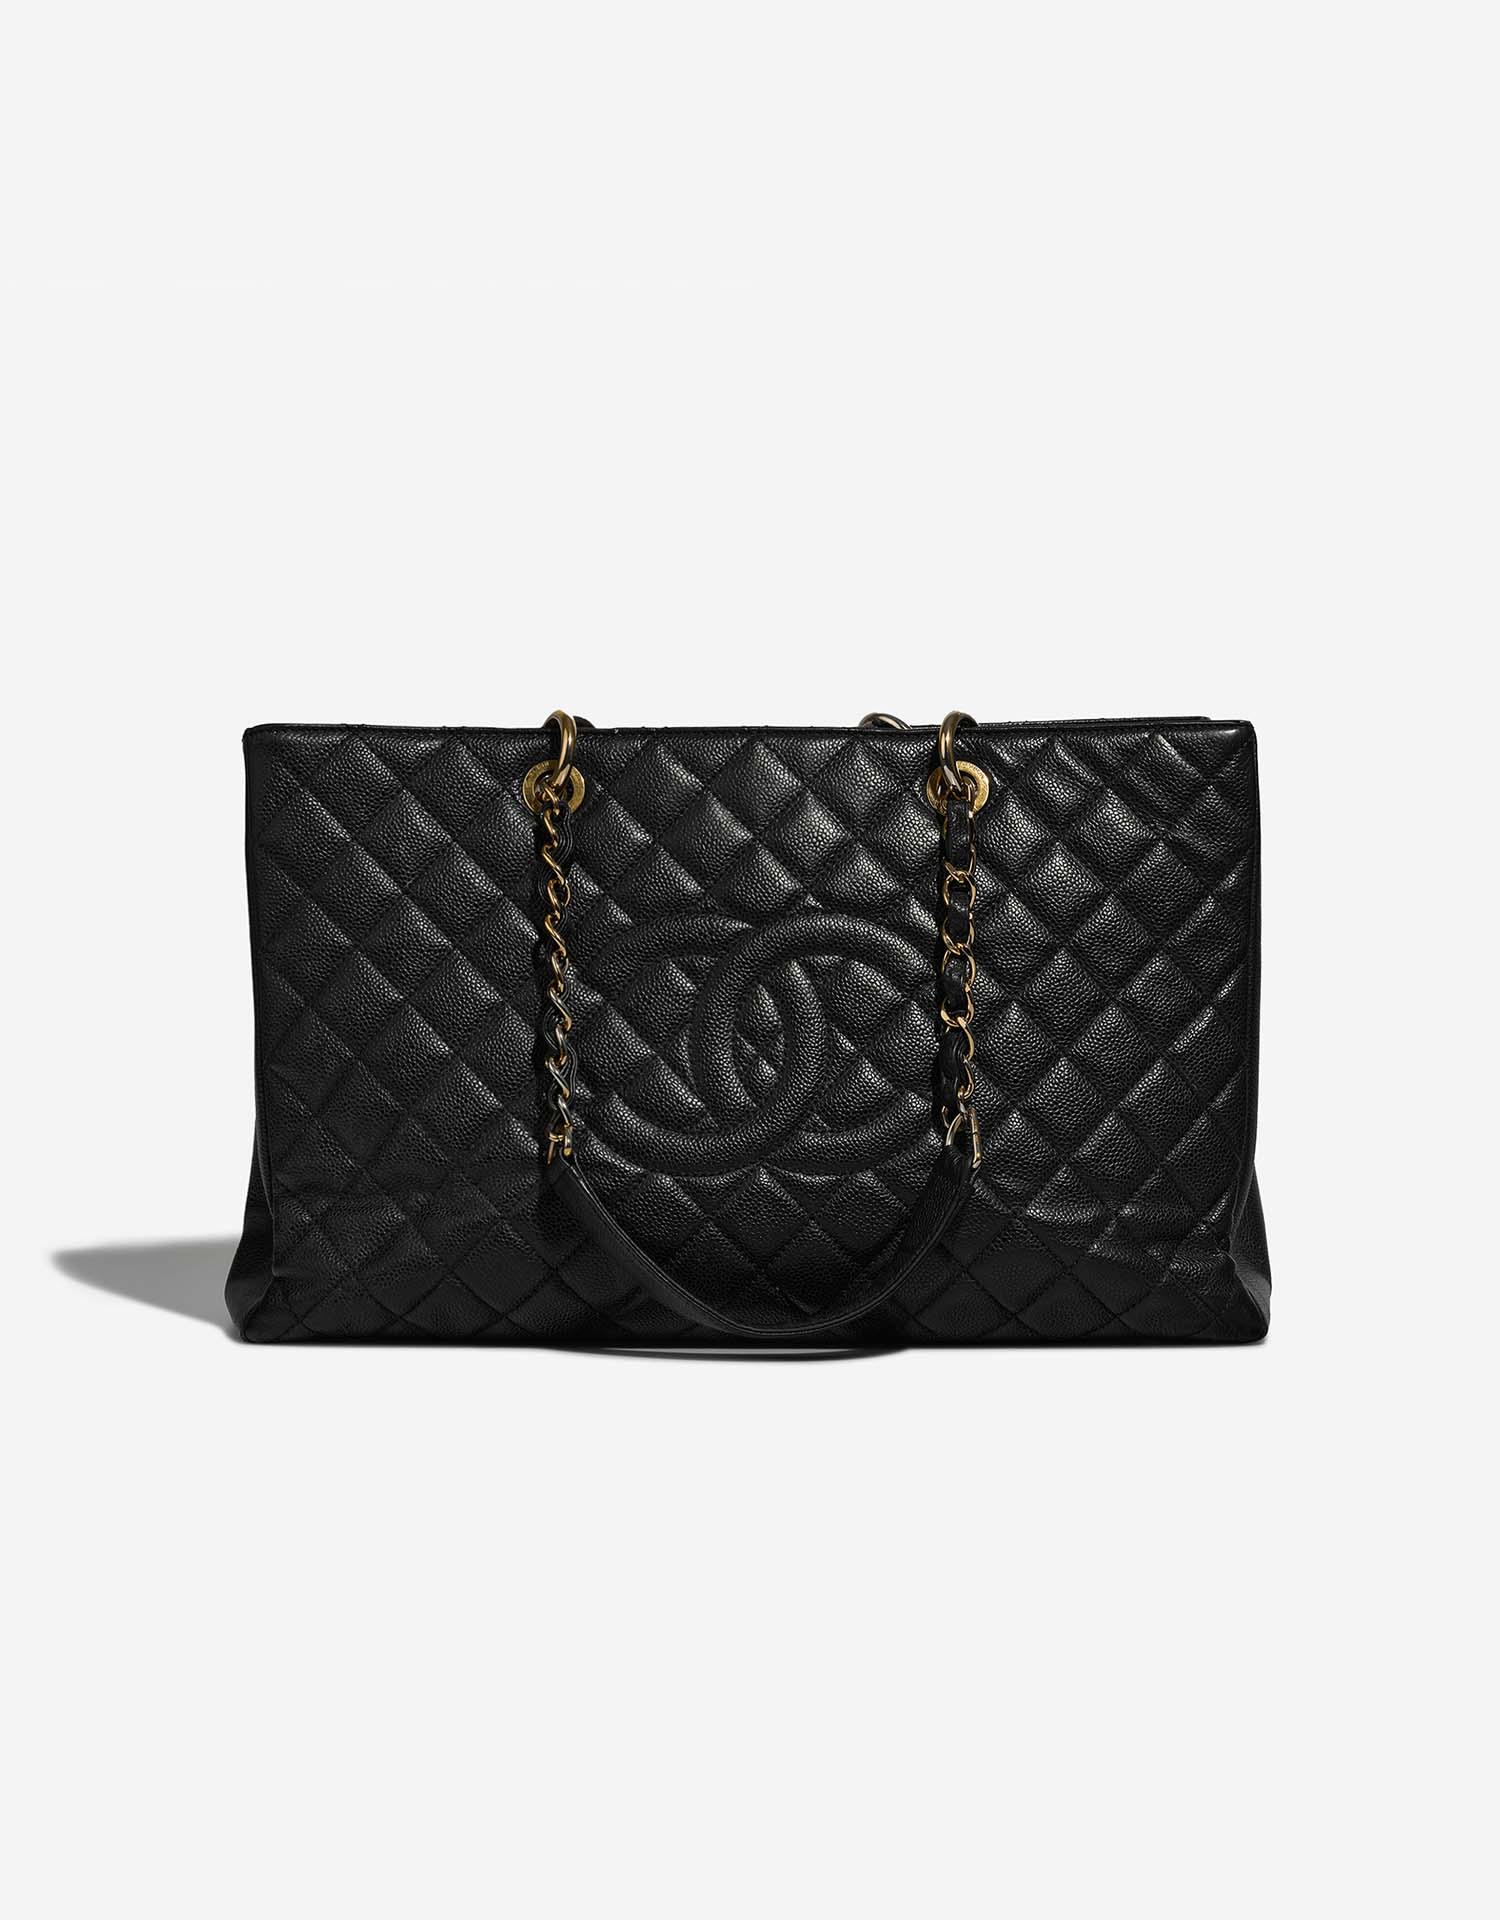 Authentic CHANEL caviar leather travel bag black